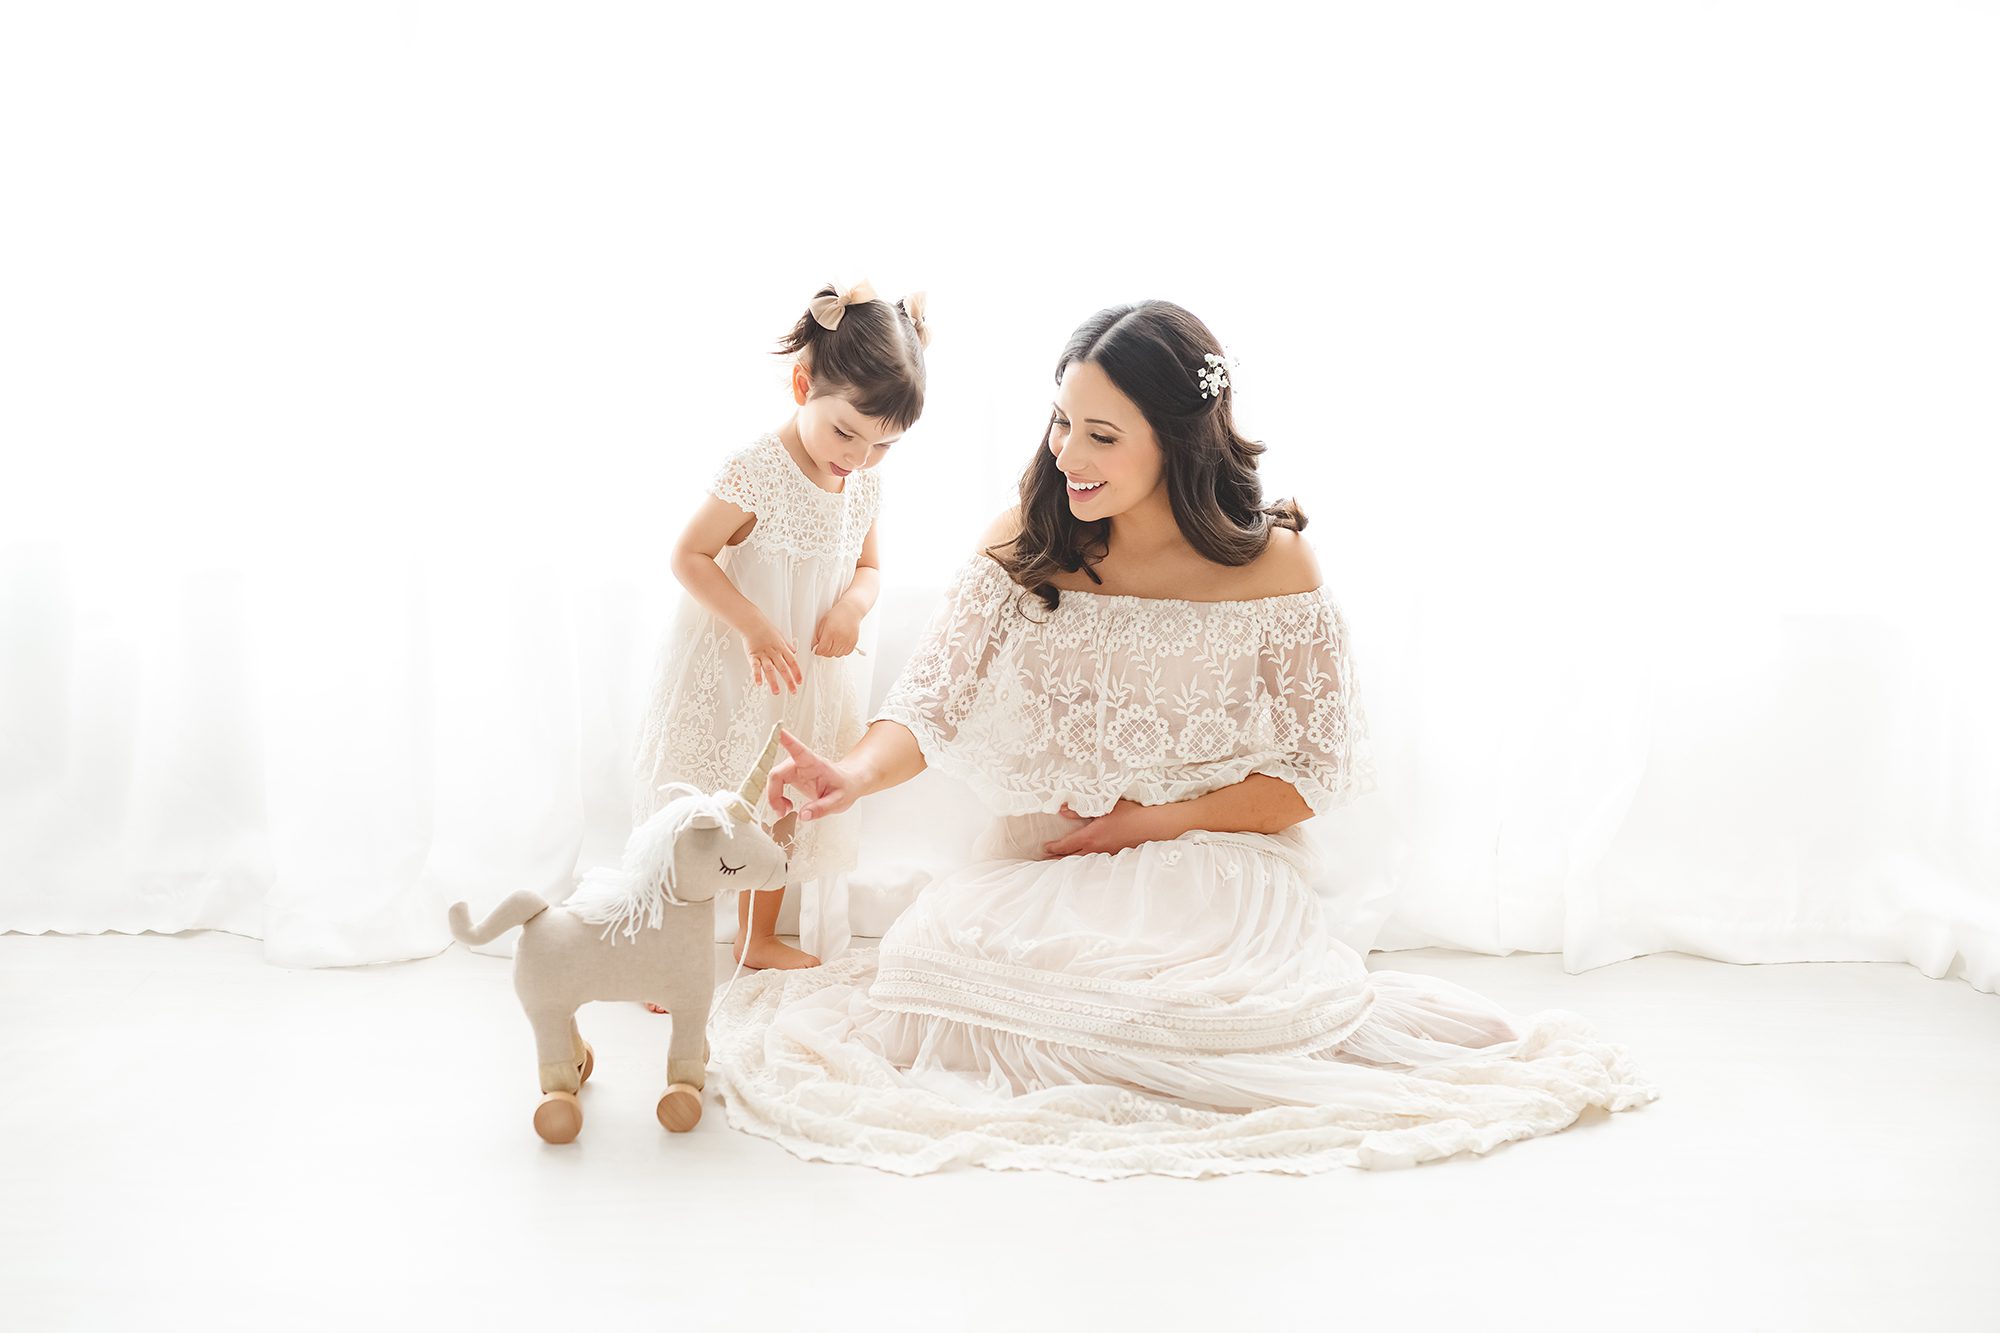 Pregnant mother sitting with daughter playing. Phoenix luxury pregnancy photos by Reaj Roberts Photography